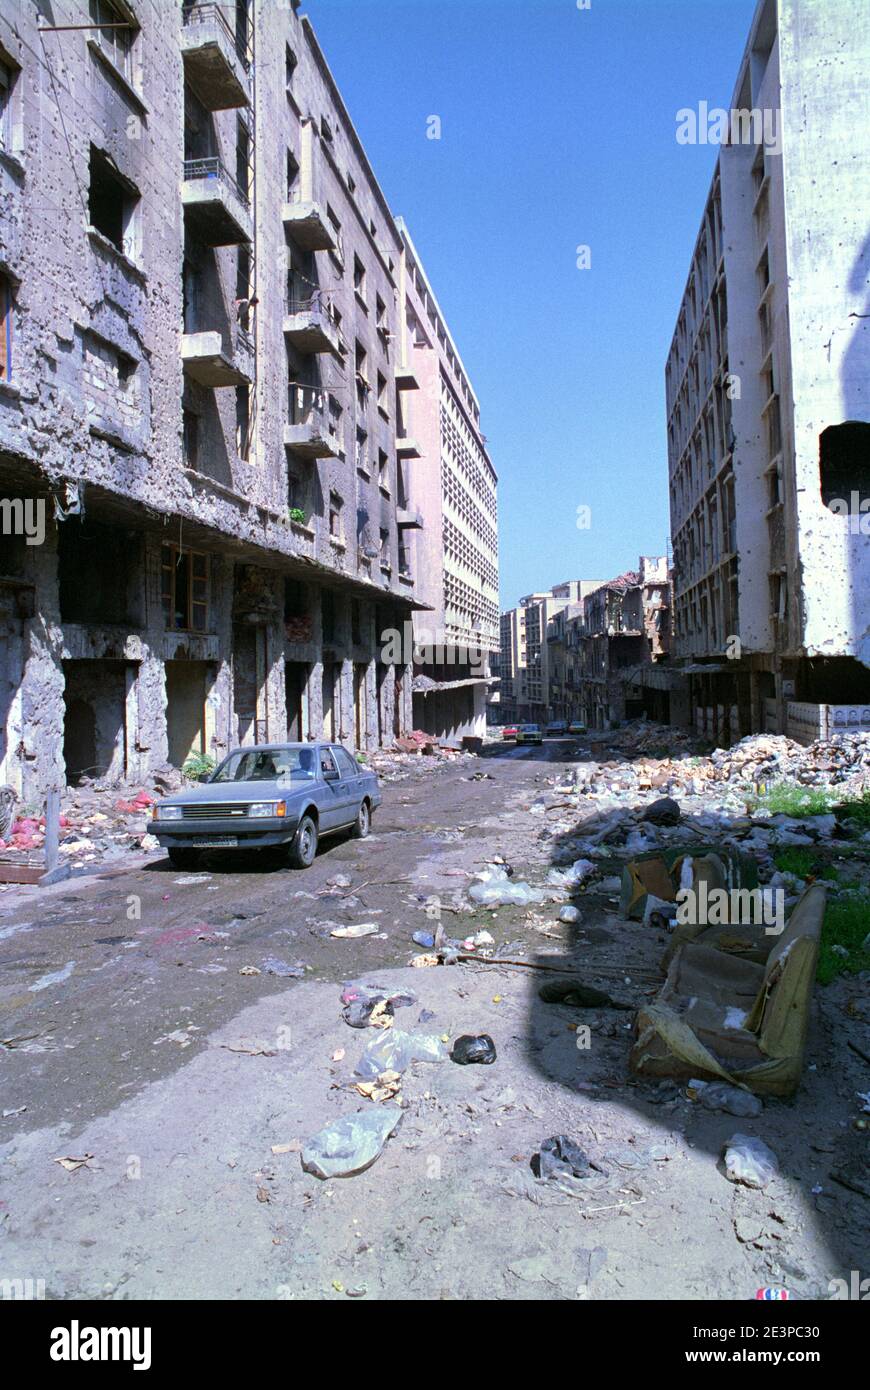 18th September 1993 After 15 years of civil war, a battle-scarred street near the Green Line in Beirut. Stock Photo